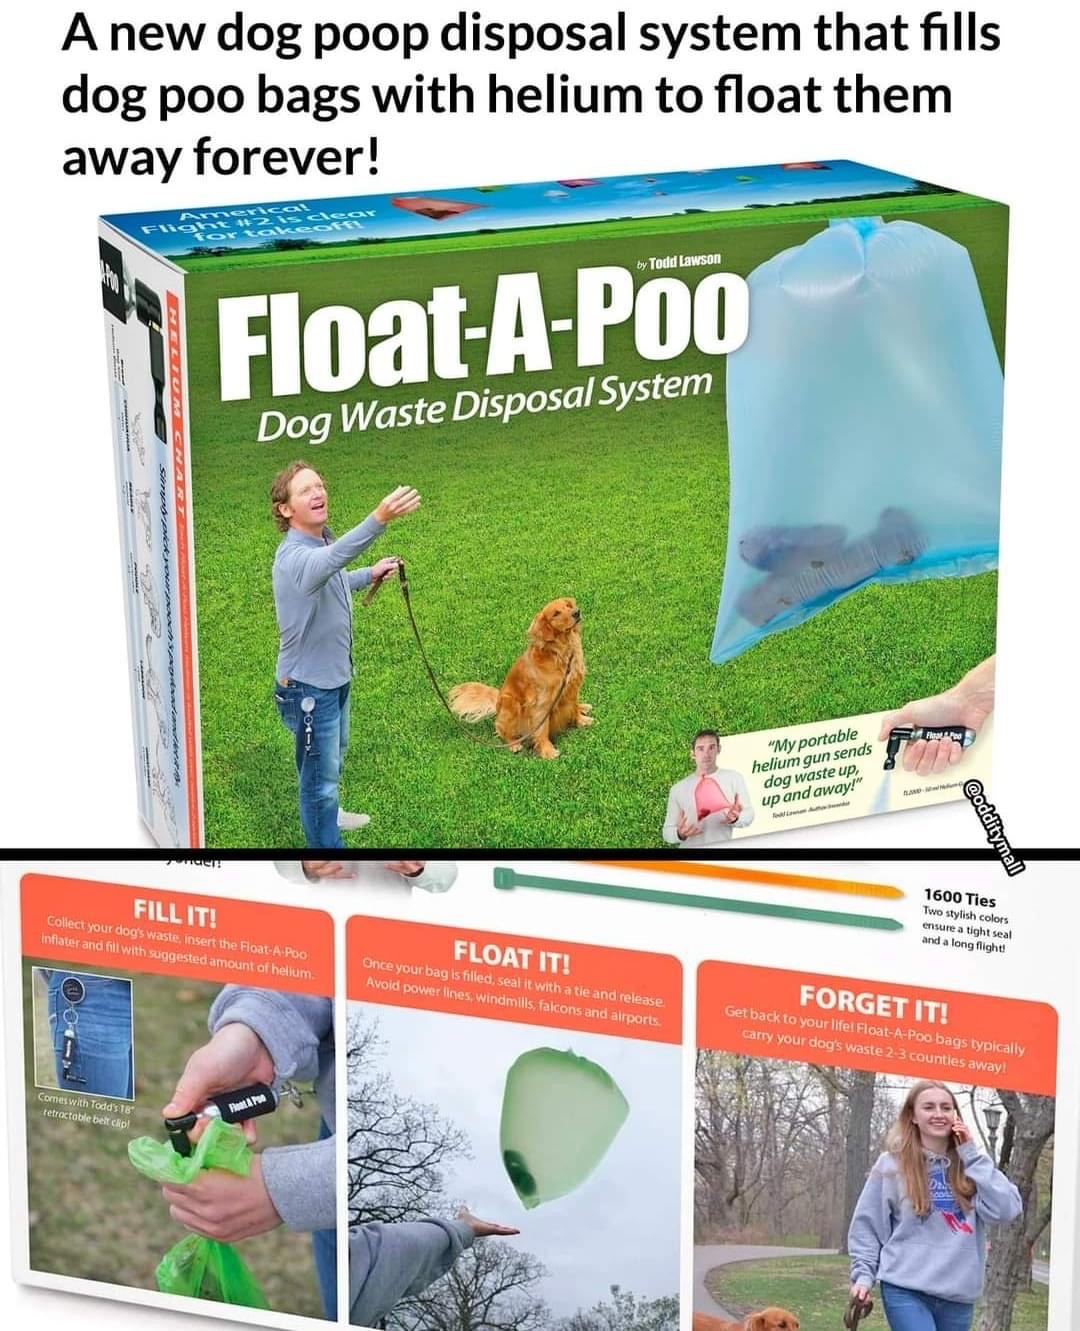 A new dog poop disposal system